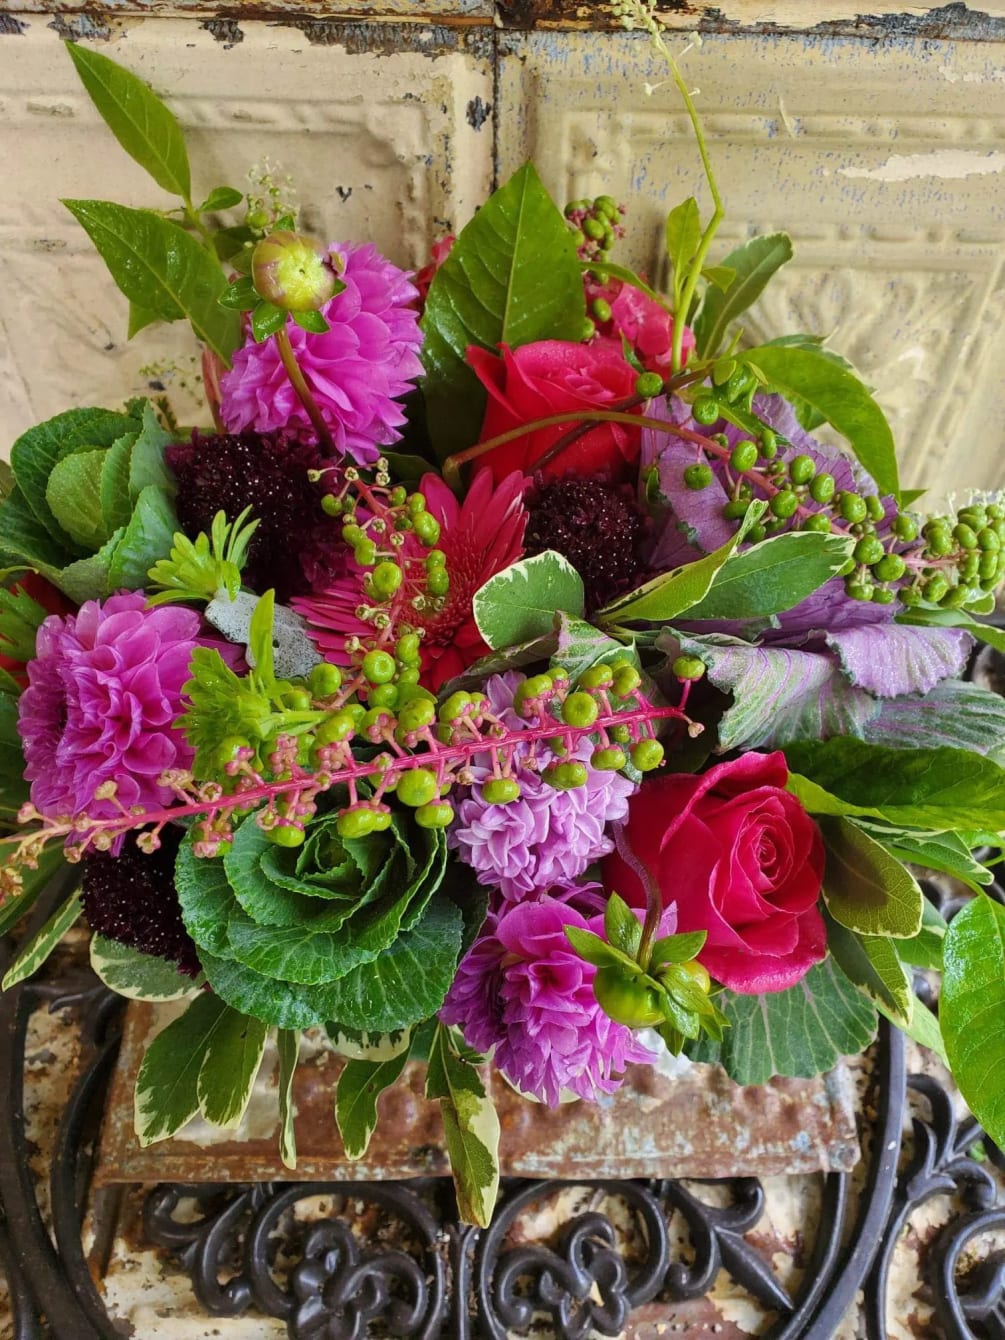 Gift a pop of color with this out-of-this-world arrangement featuring roses, kale